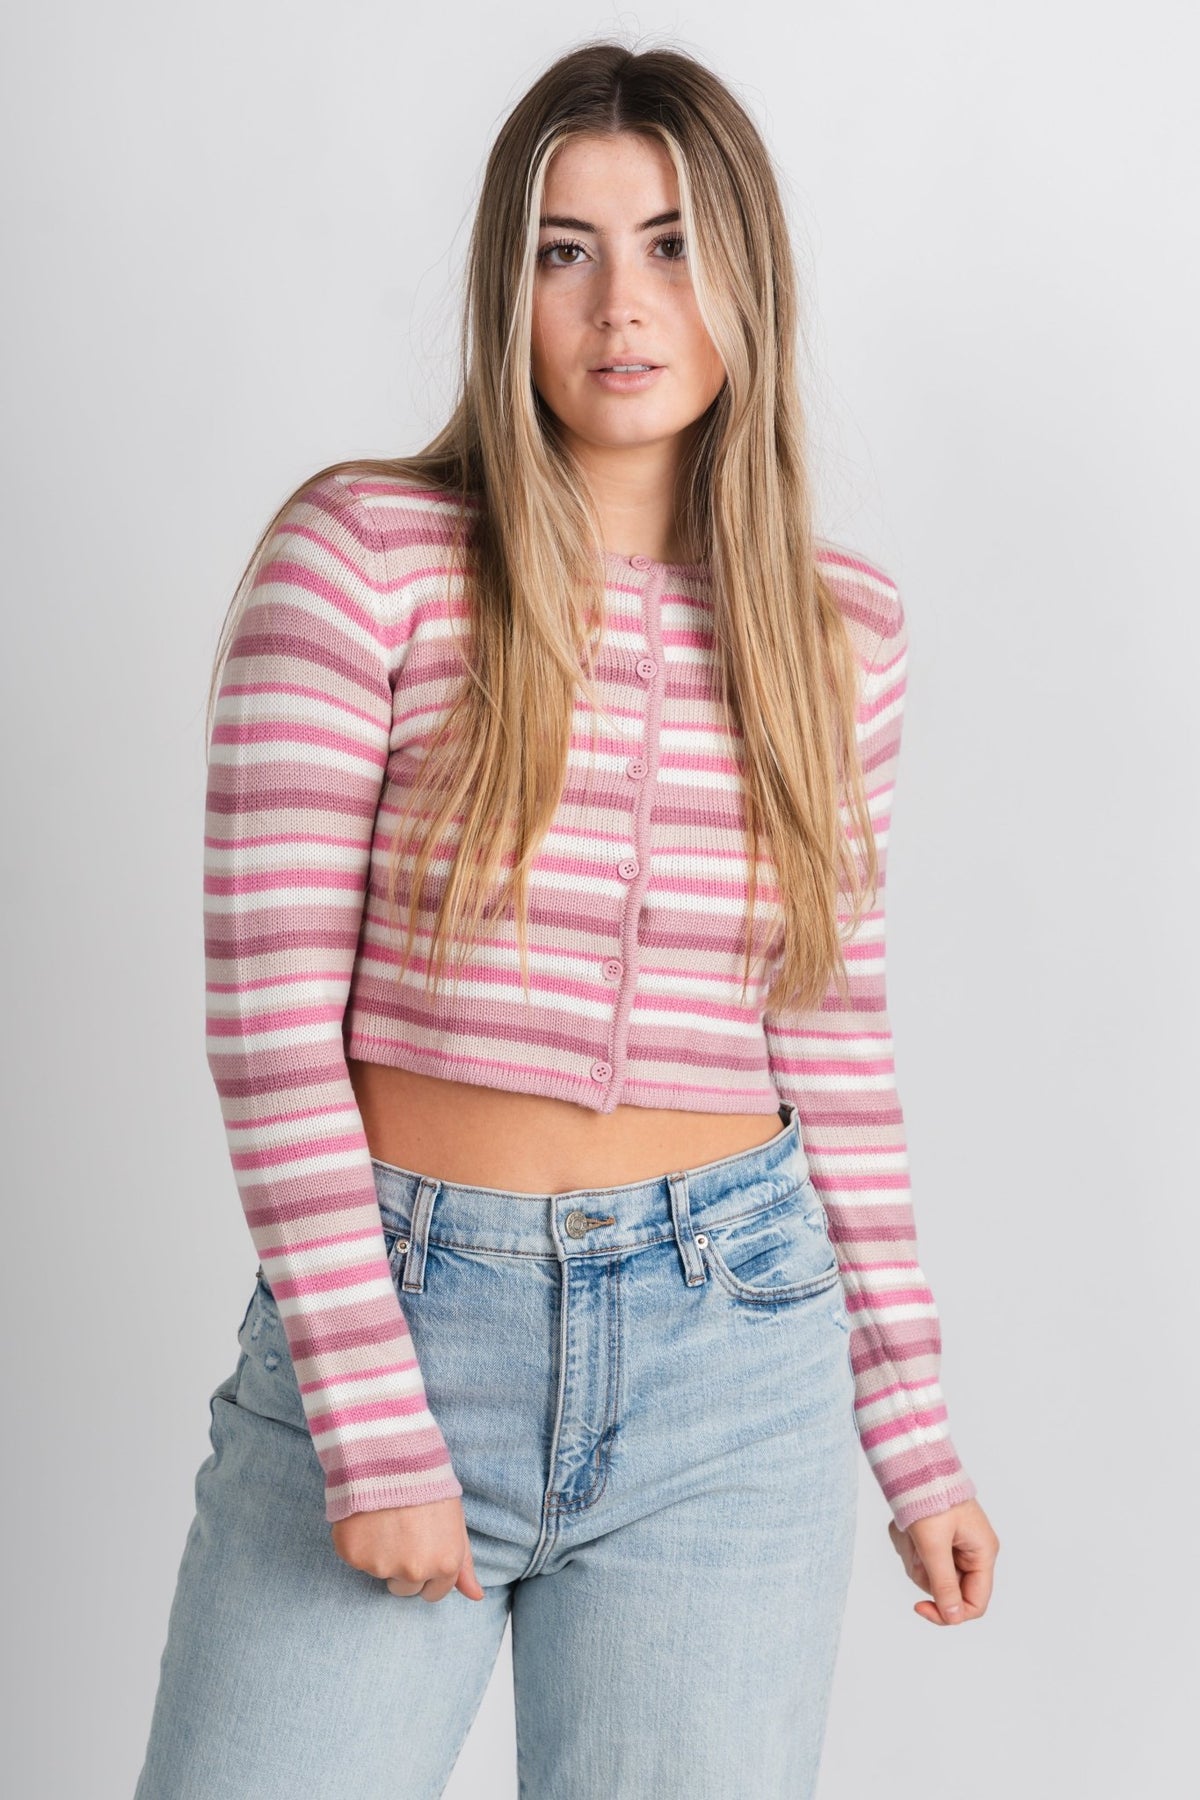 Striped sweater cardigan pink/white – Boutique Sweaters | Fashionable Sweaters at Lush Fashion Lounge Boutique in Oklahoma City